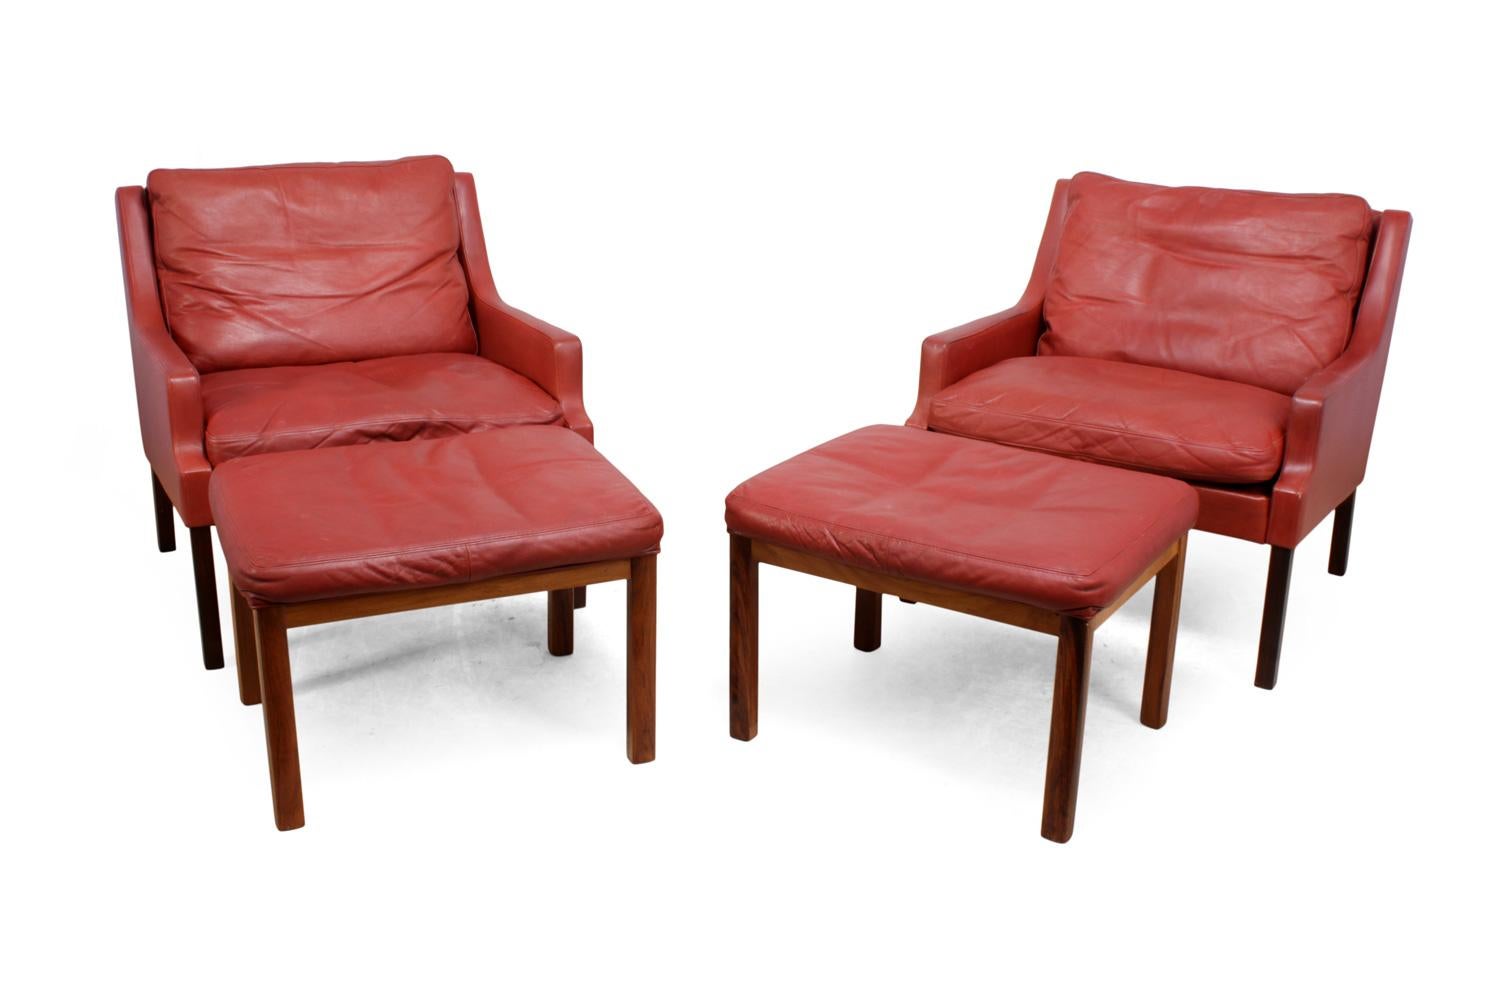 Danish lounge chairs in red leather with stools.
A pair of Danish lounge chairs and stools with rosewood legs and red leather upholstery and down filled cushions designed by Rud Thygesen and Johnny Sørensen. Manufactured by Vejen Polster